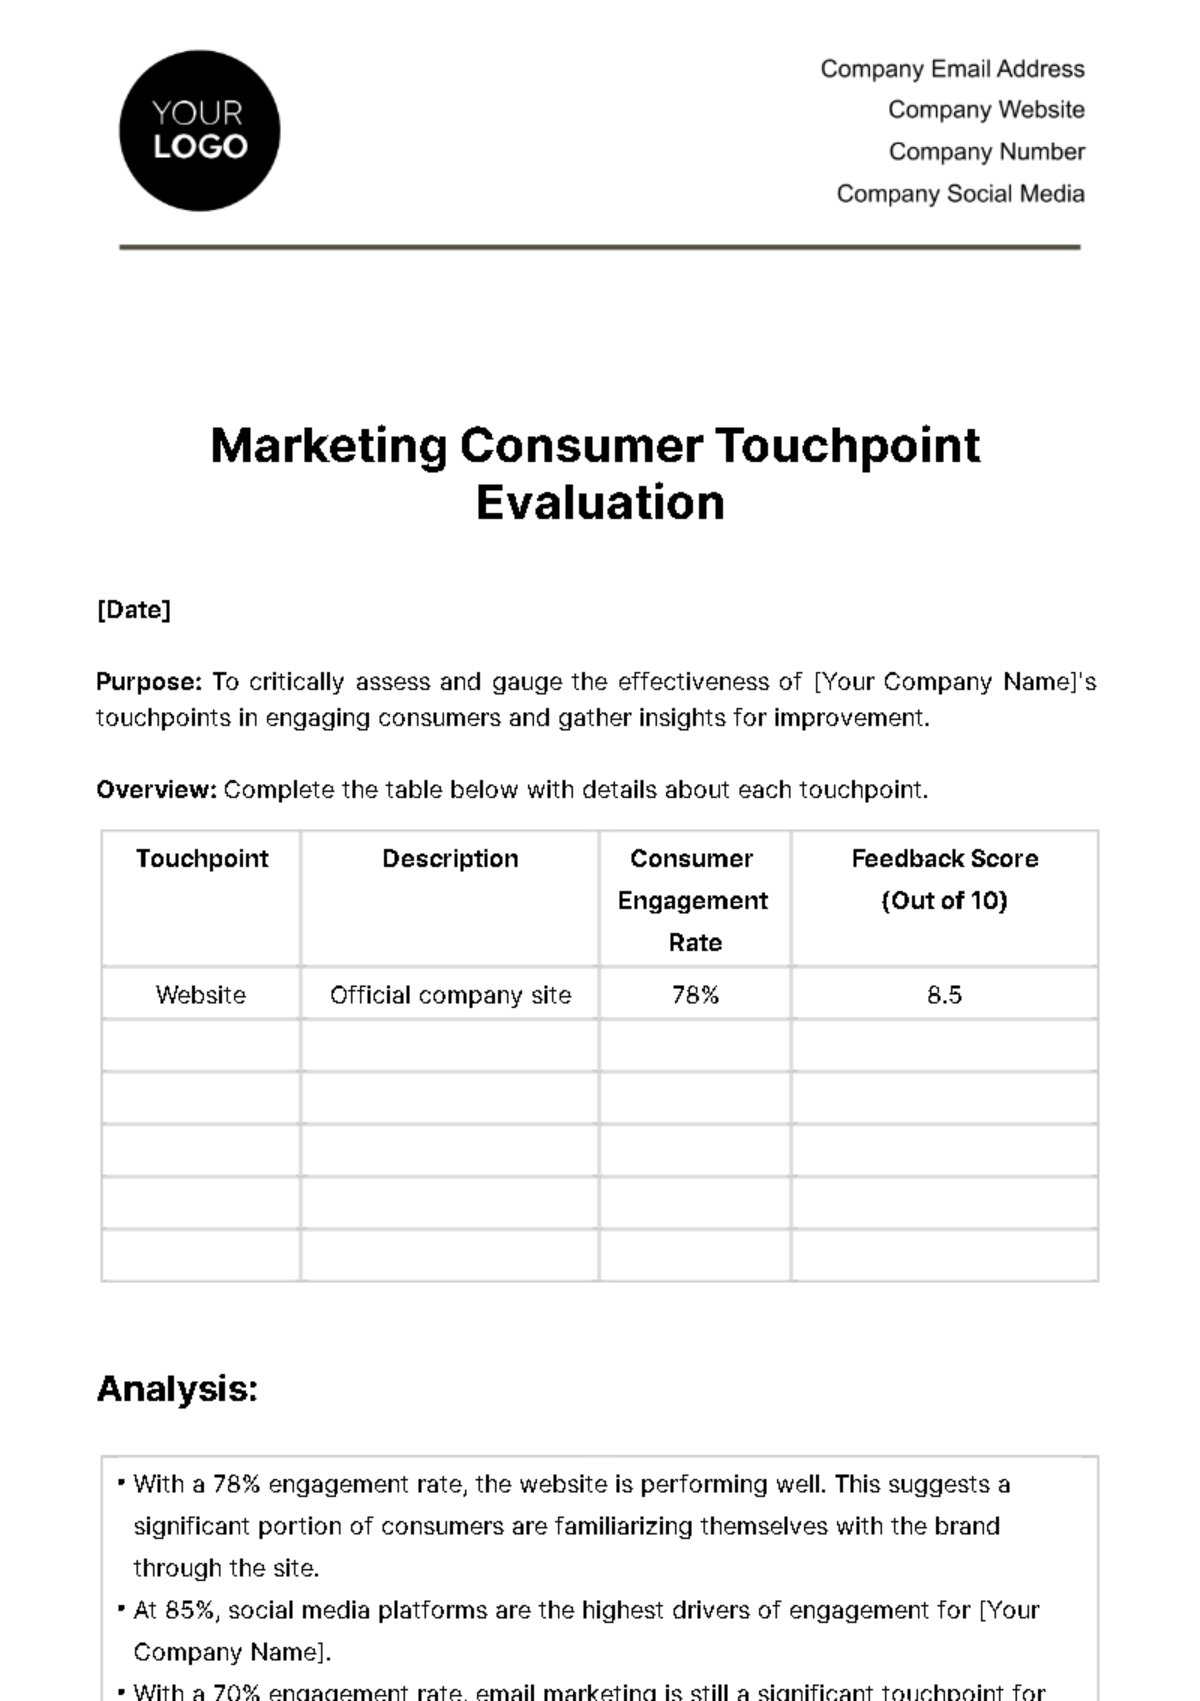 Free Marketing Consumer Touchpoint Evaluation Template